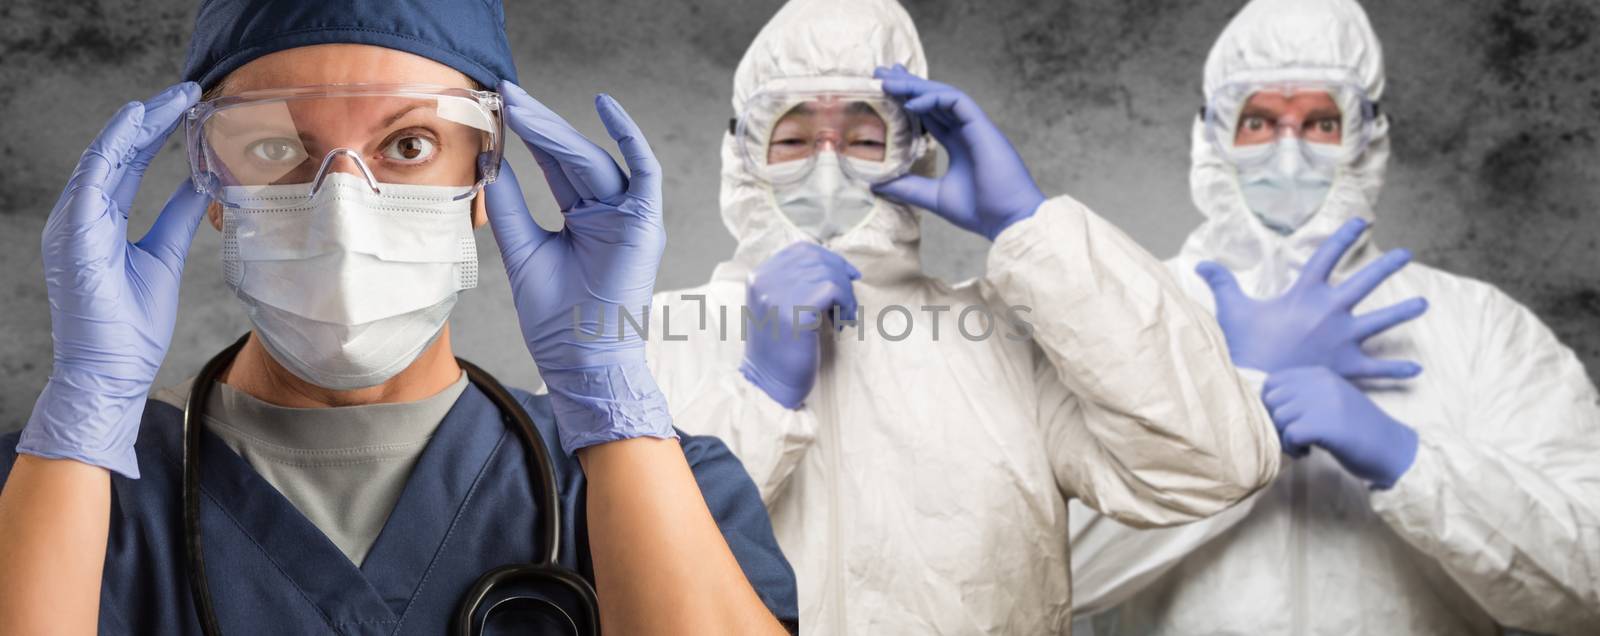 Caucasian Woman, Man and Chinese Man In Masks, Goggles and Hazmat Suites. by Feverpitched